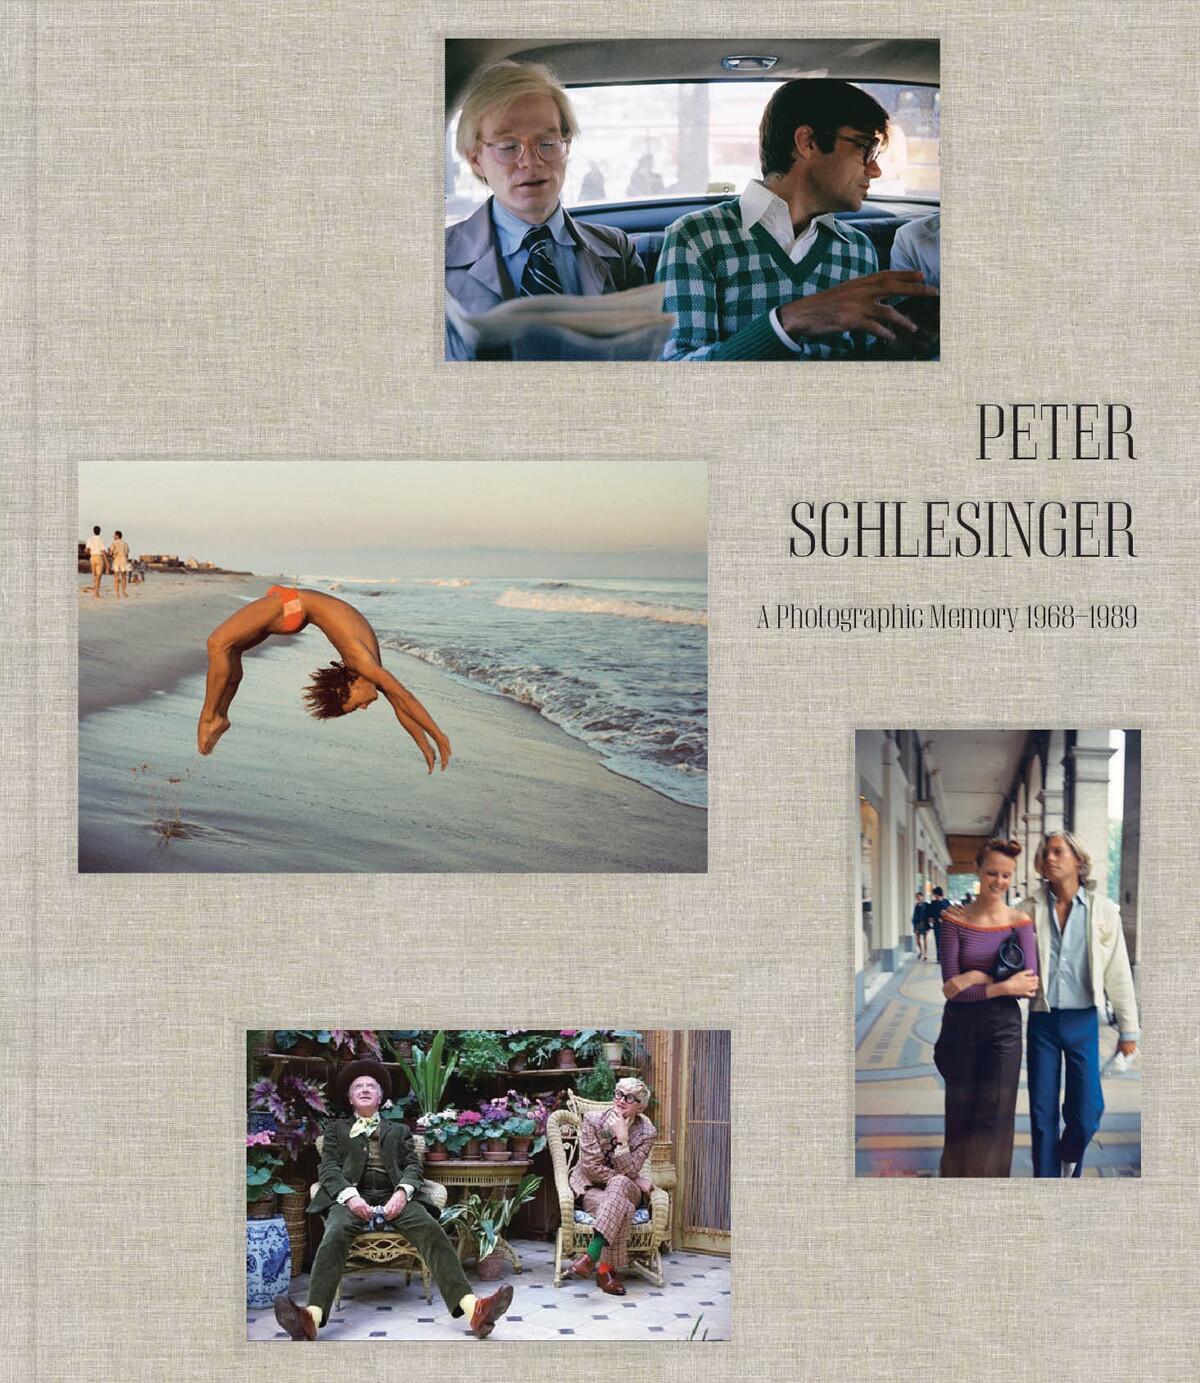 "Peter Schlesinger: A Photographic Memory"